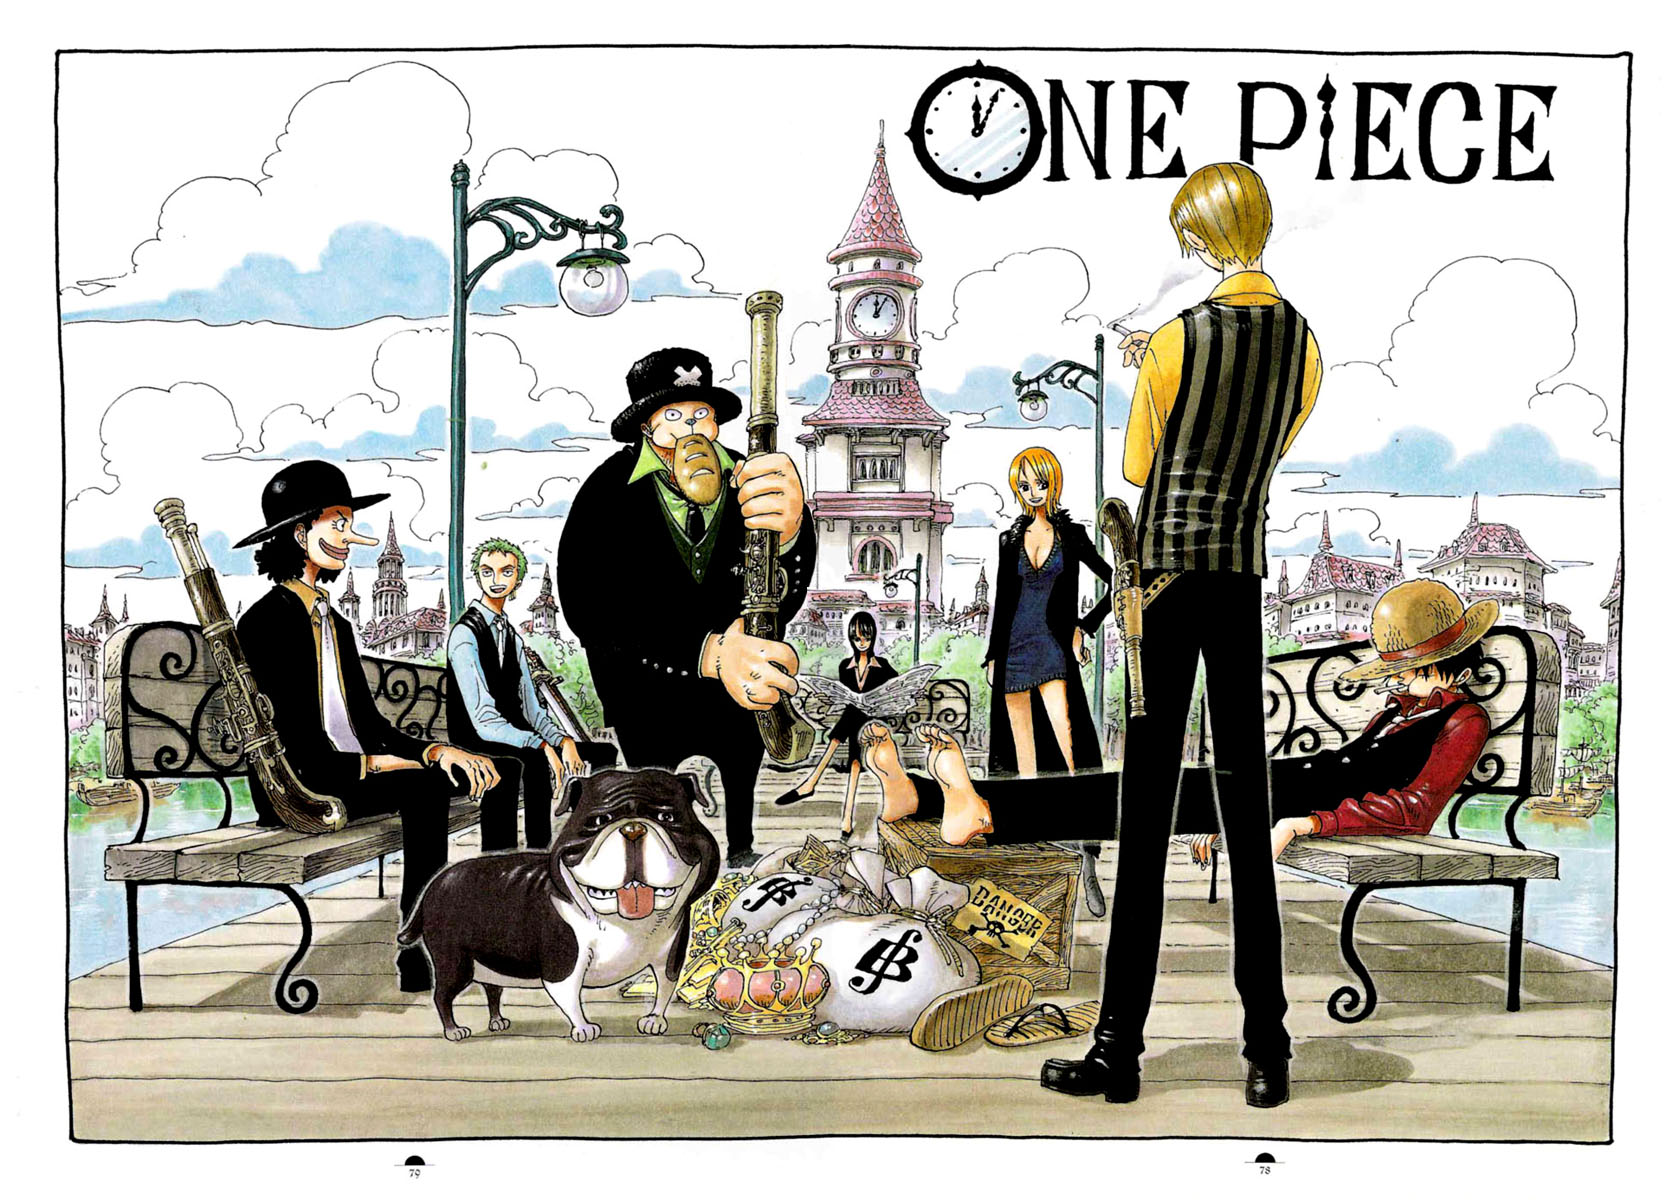 The fearless Straw Hat Pirates from One Piece set sail on a grand adventure!